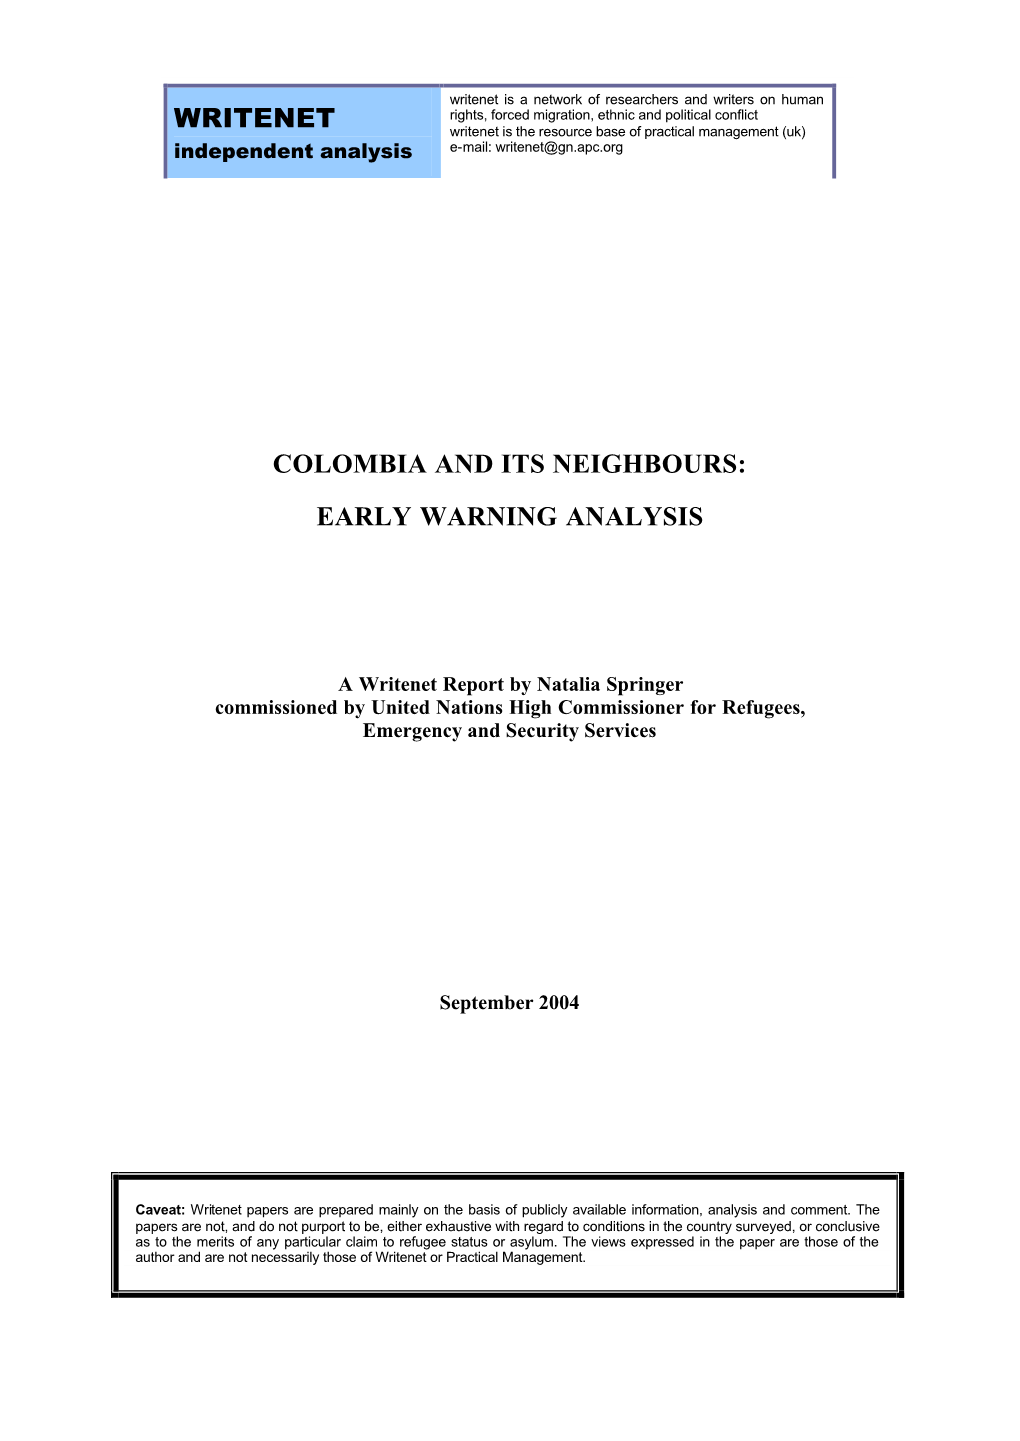 Colombia and Its Neighbours: Early Warning Analysis